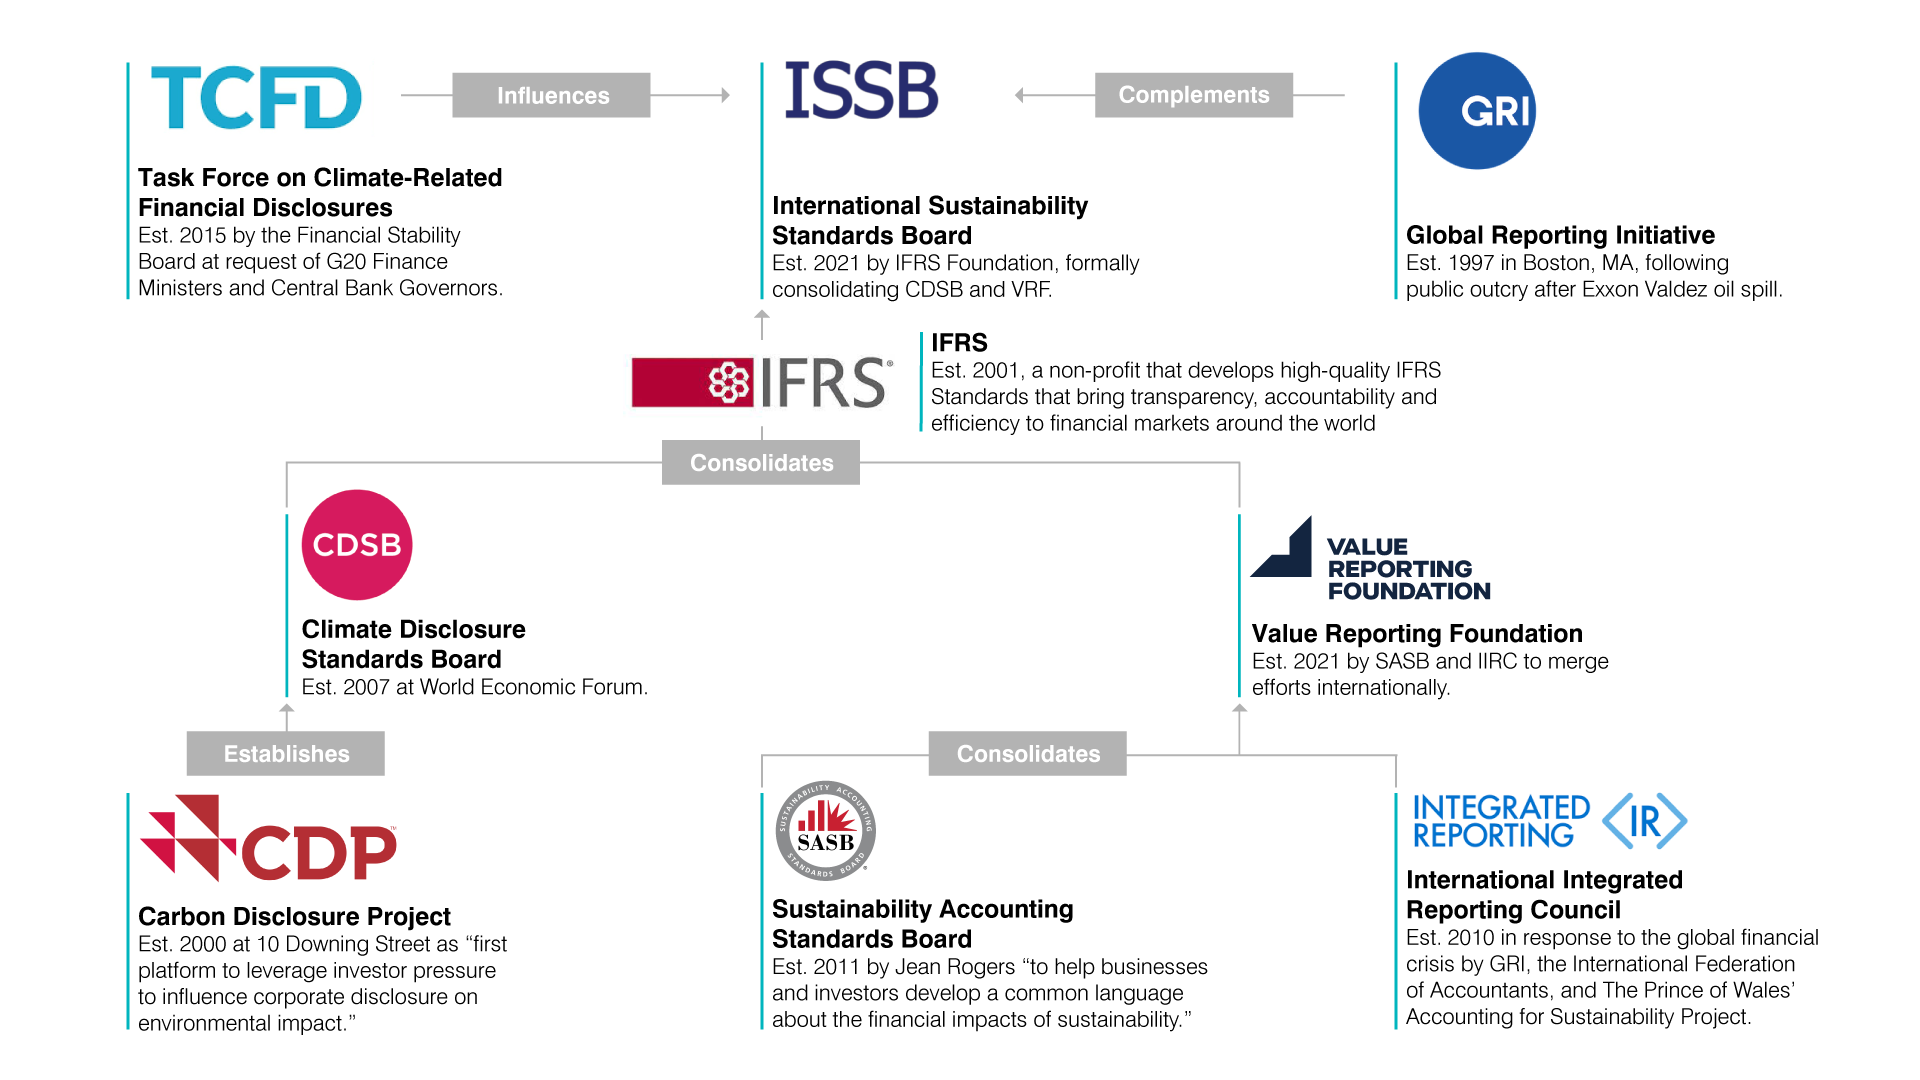 Synergies between the International Sustainability Standards Board (ISSB) and existing sustainability frameworks.